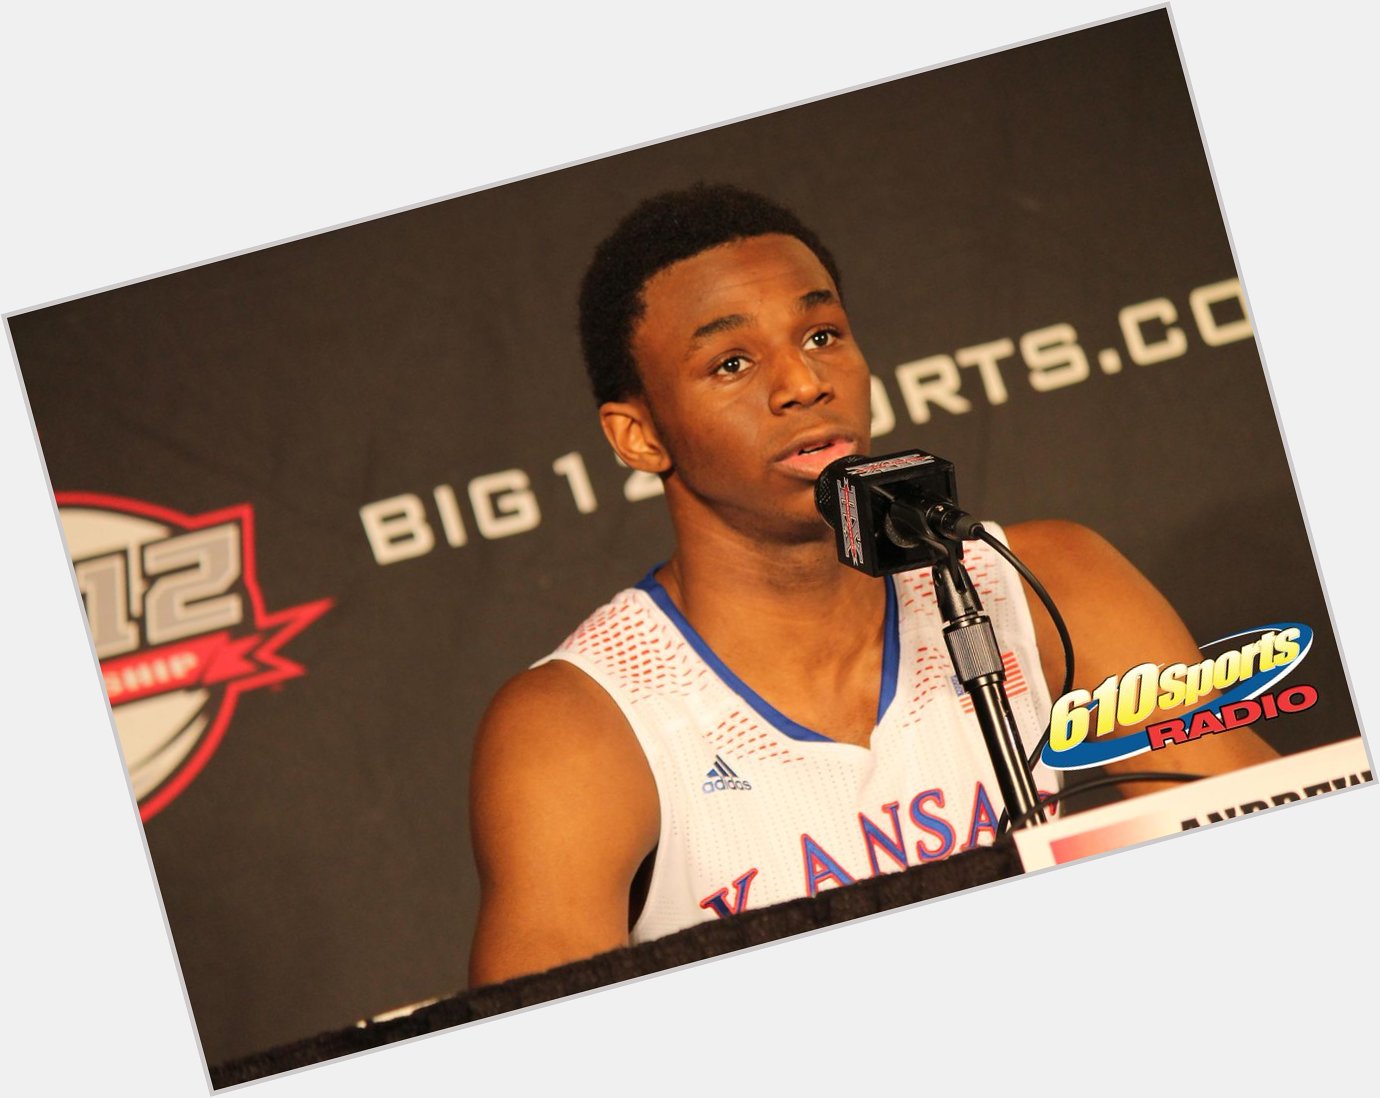 Andrew Wiggins turned 20 today. 